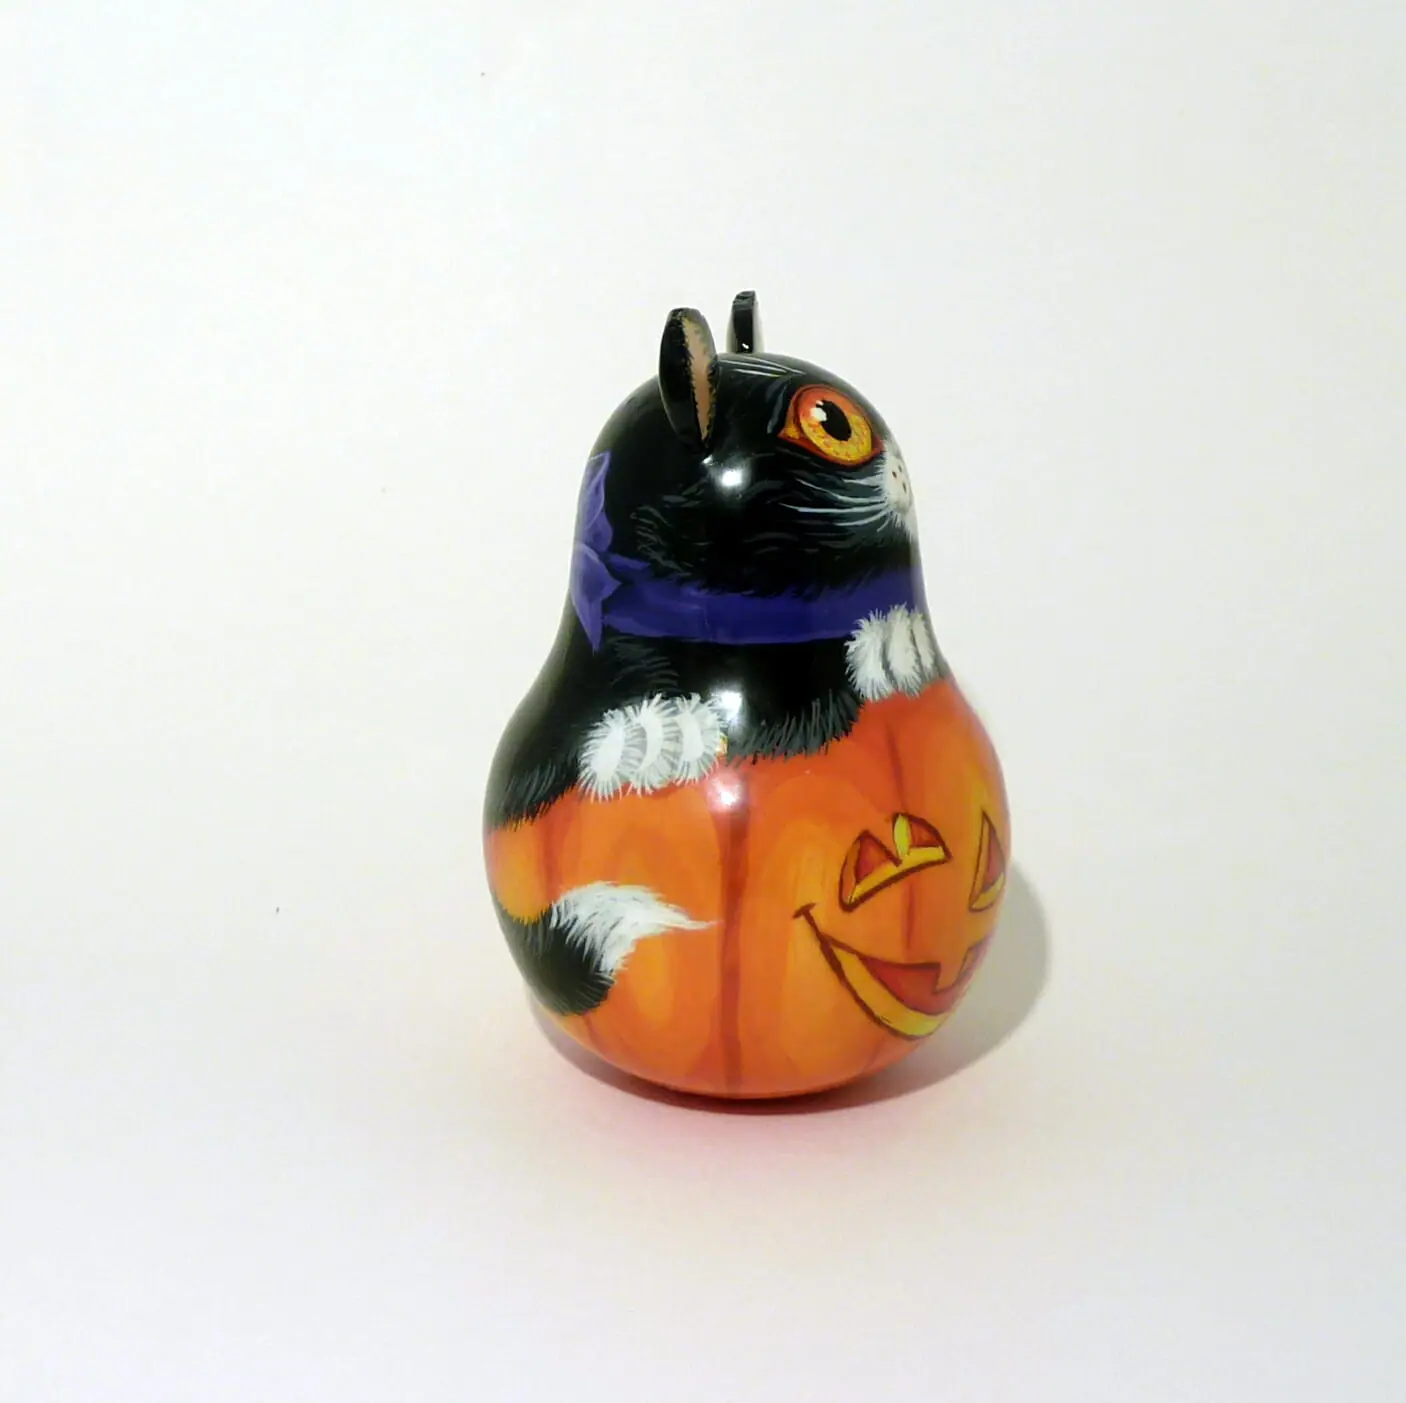 a small decorative pumpkin and a black cat . an unusual bell for halloween . wooden tinkling roly poly doll hand painted 5.jpg